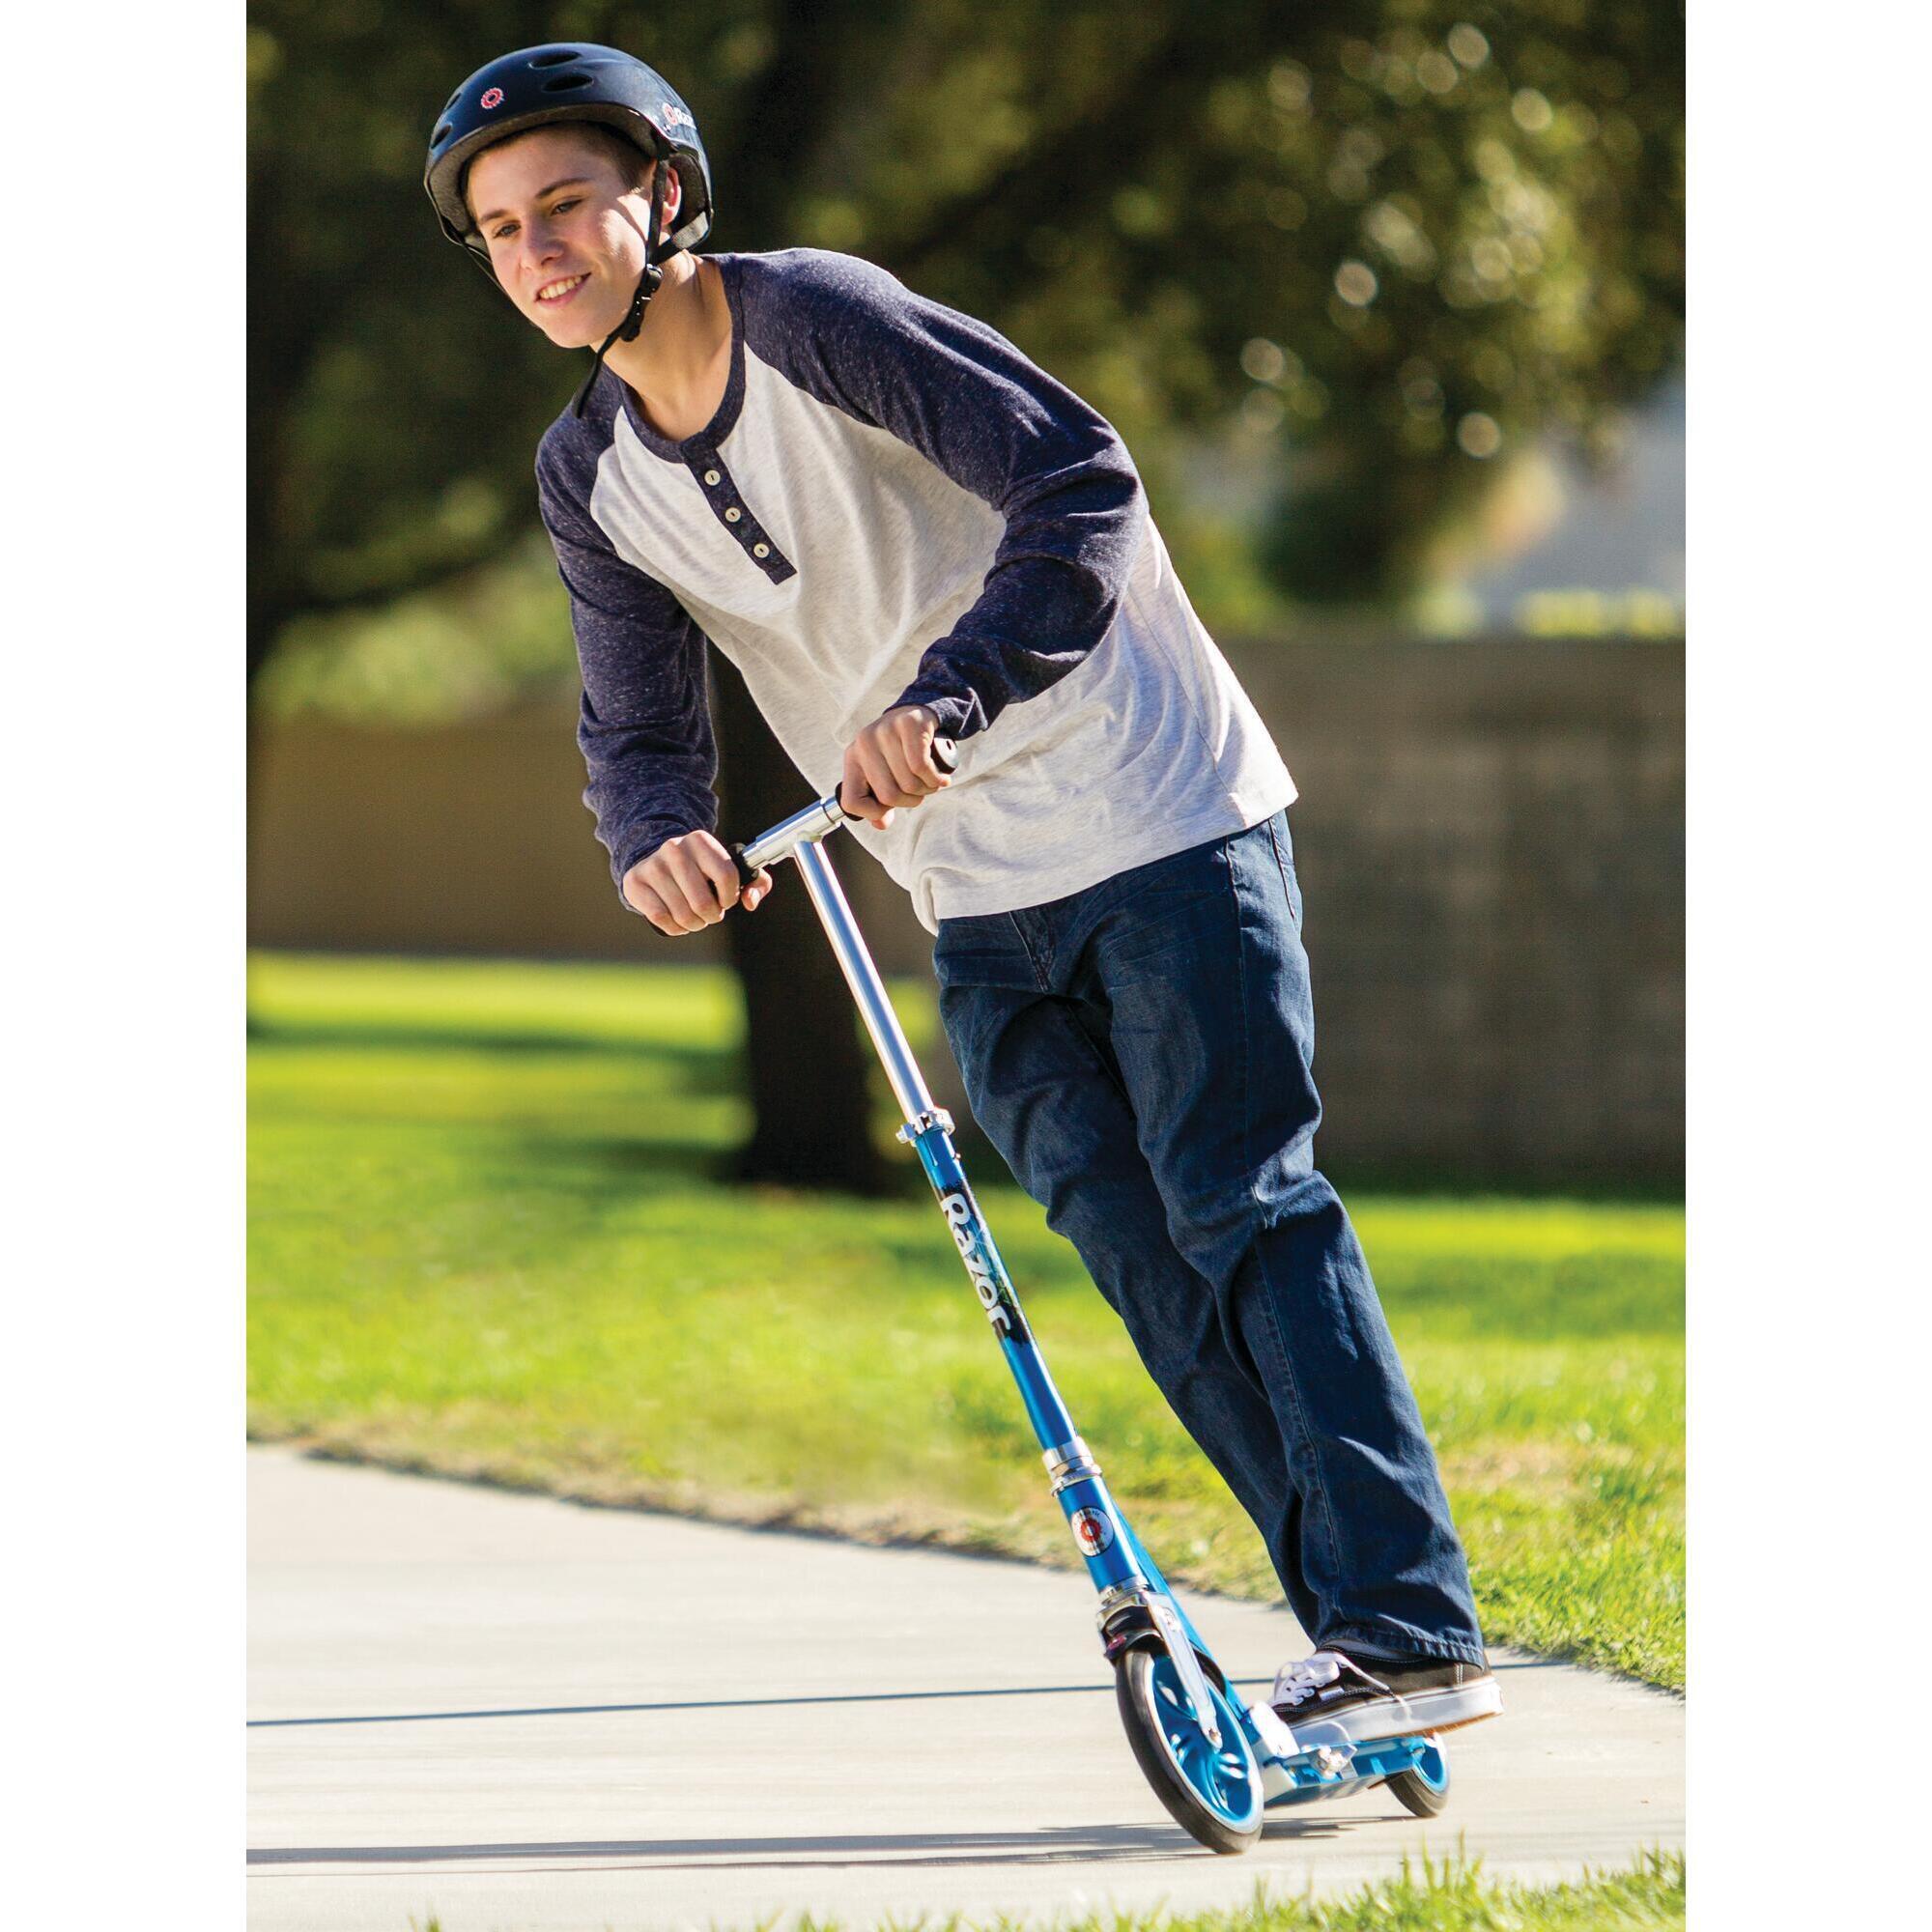 Razor A5 LUX Kids Folding Kick Scooter with 150mm Wheels Suits ages 8 Years + 5/5